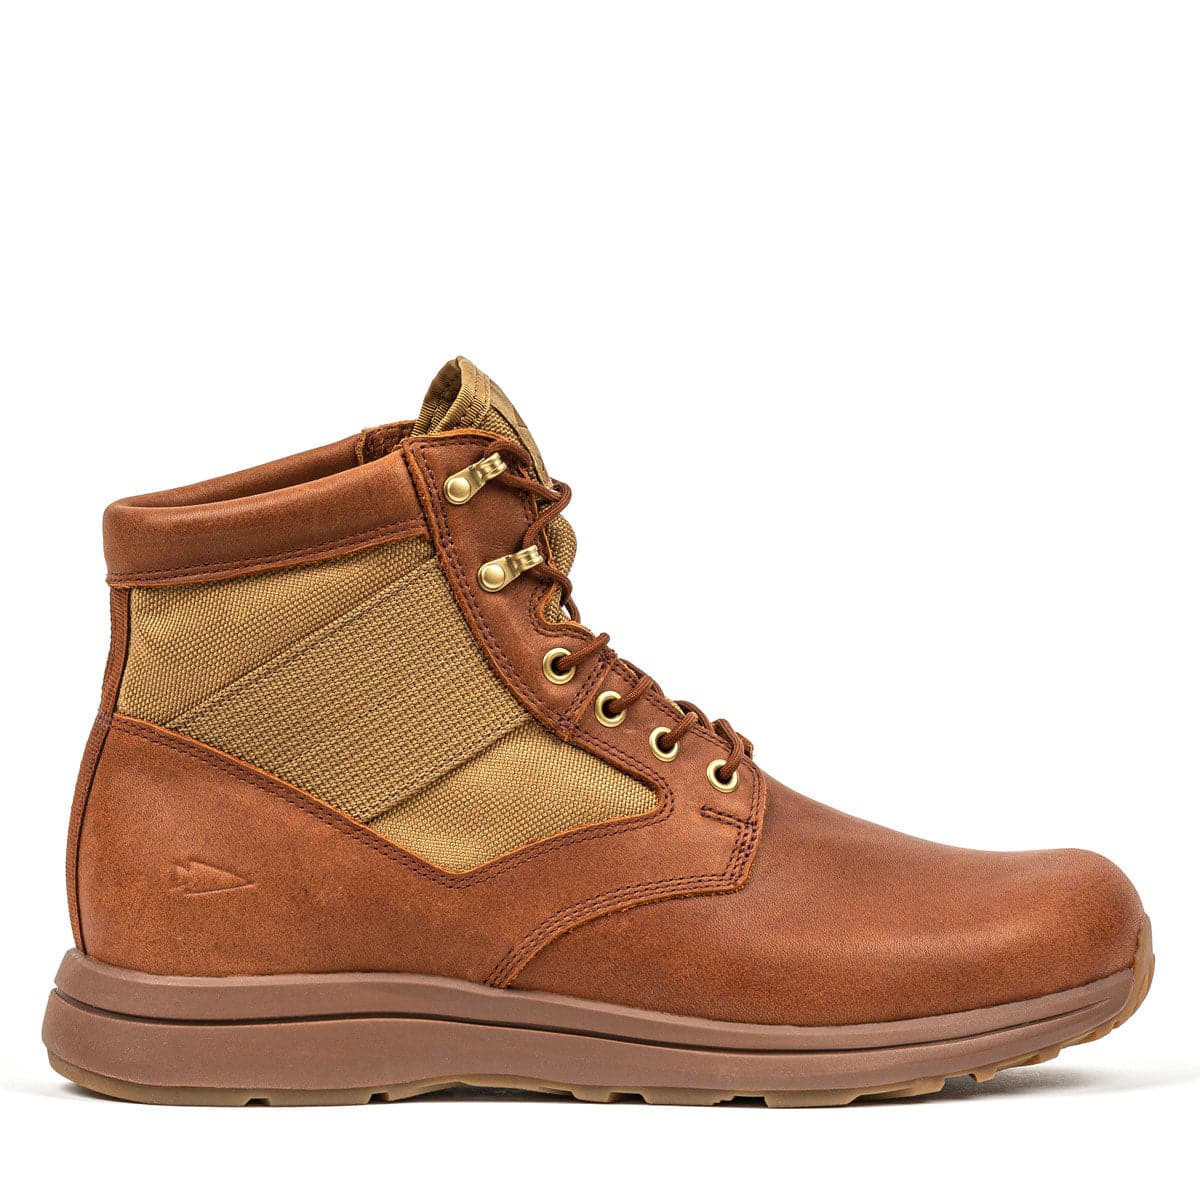 MACV-1 - Mid Top - Light Brown + Coyote - SMALL SIZES